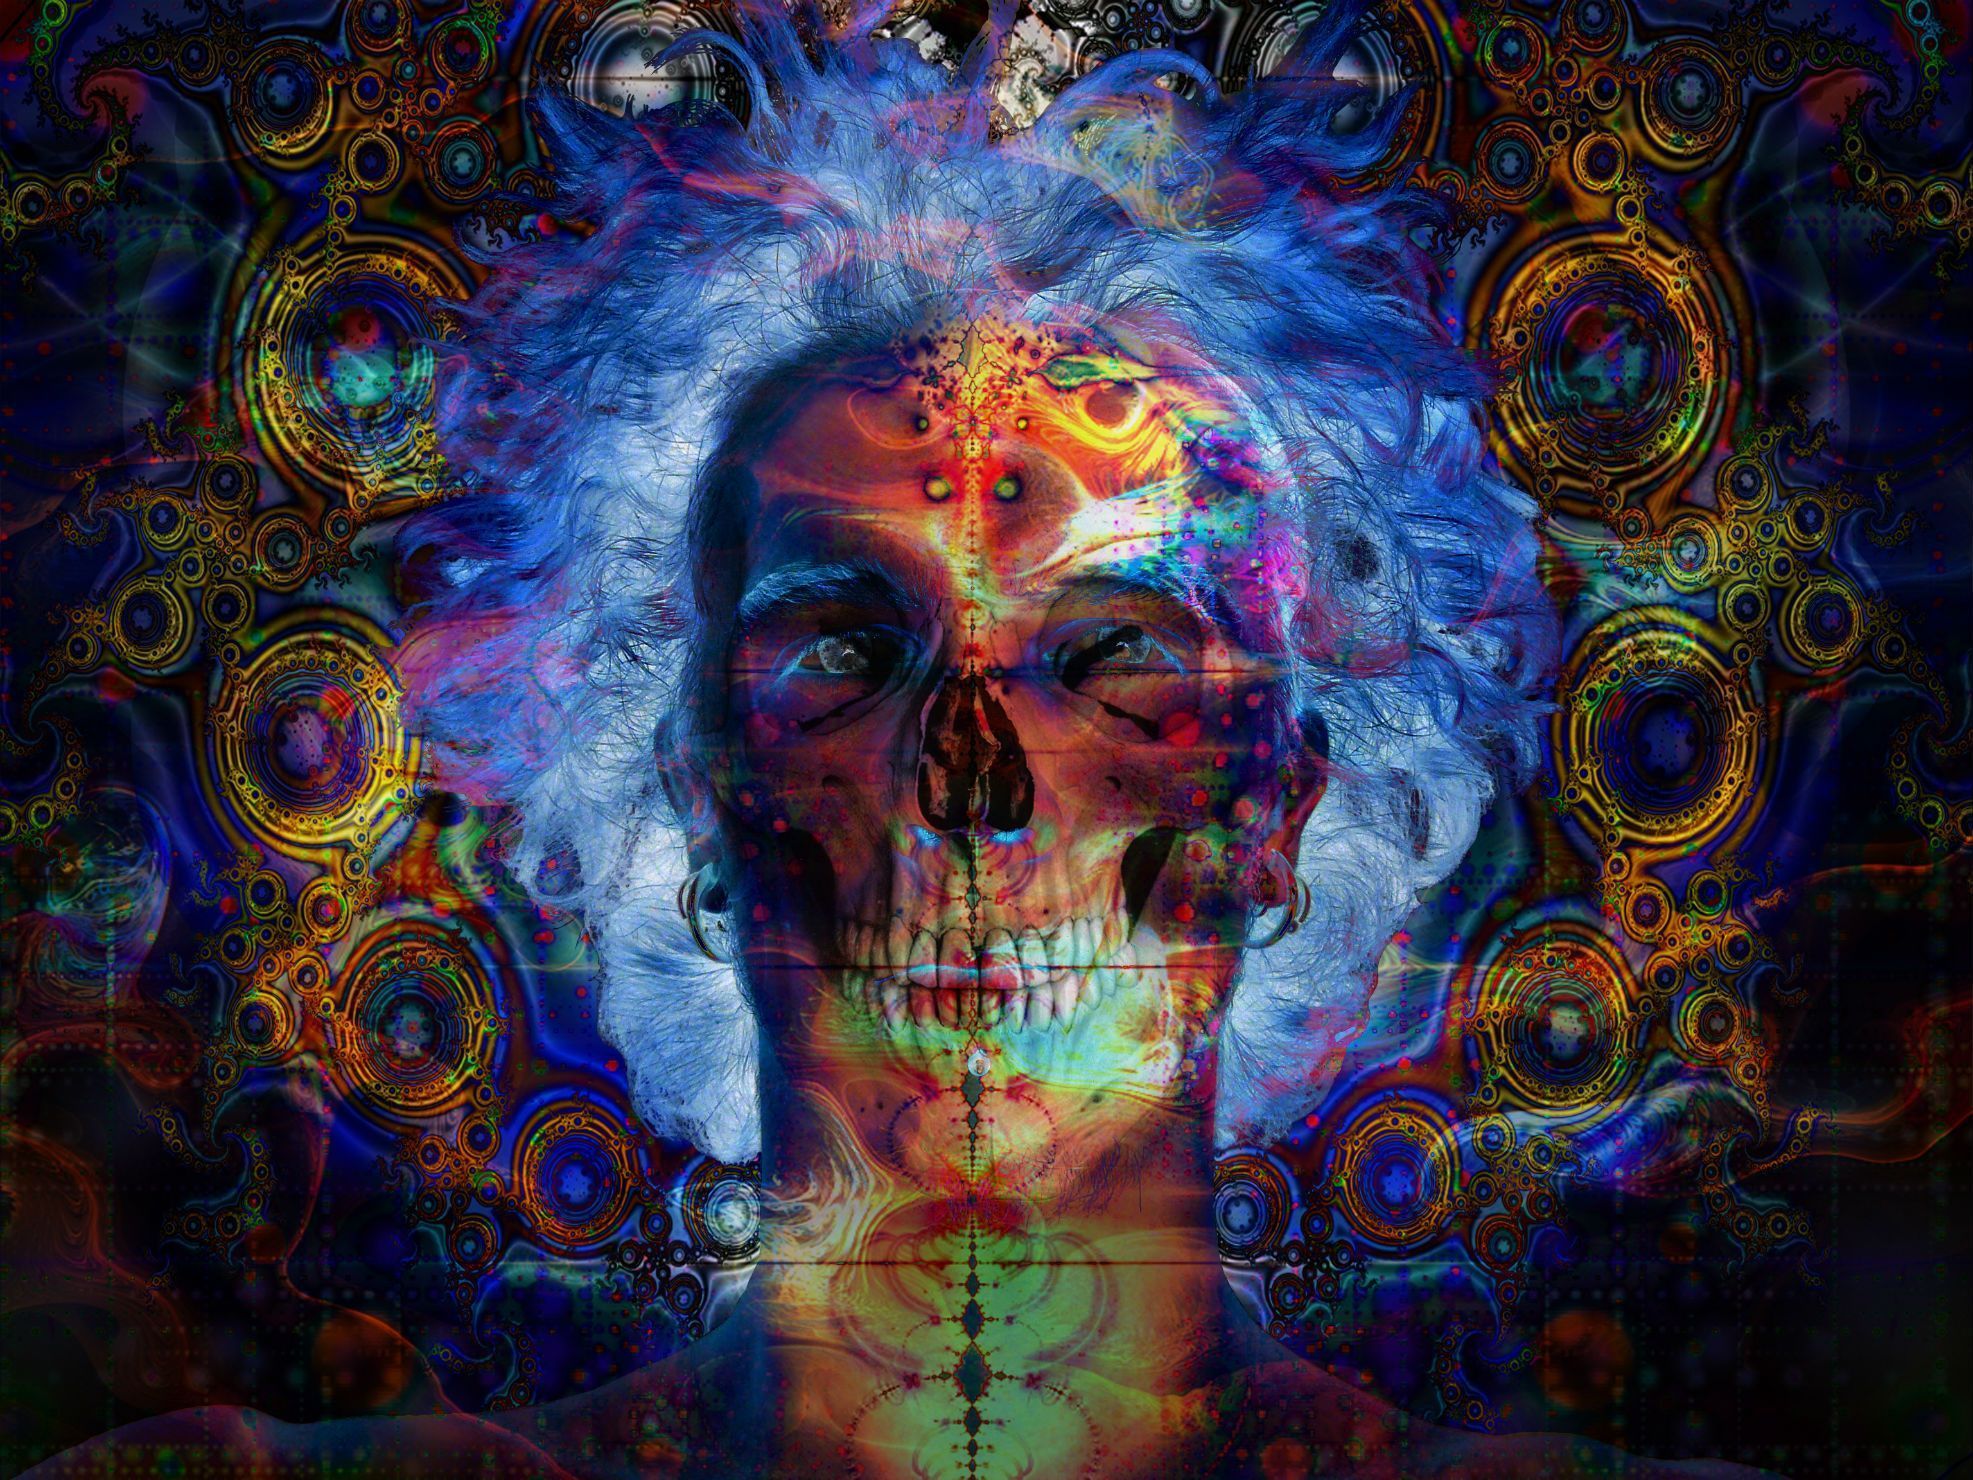 A digital artwork of an image with blue hair and colorful patterns - Trippy, psychedelic